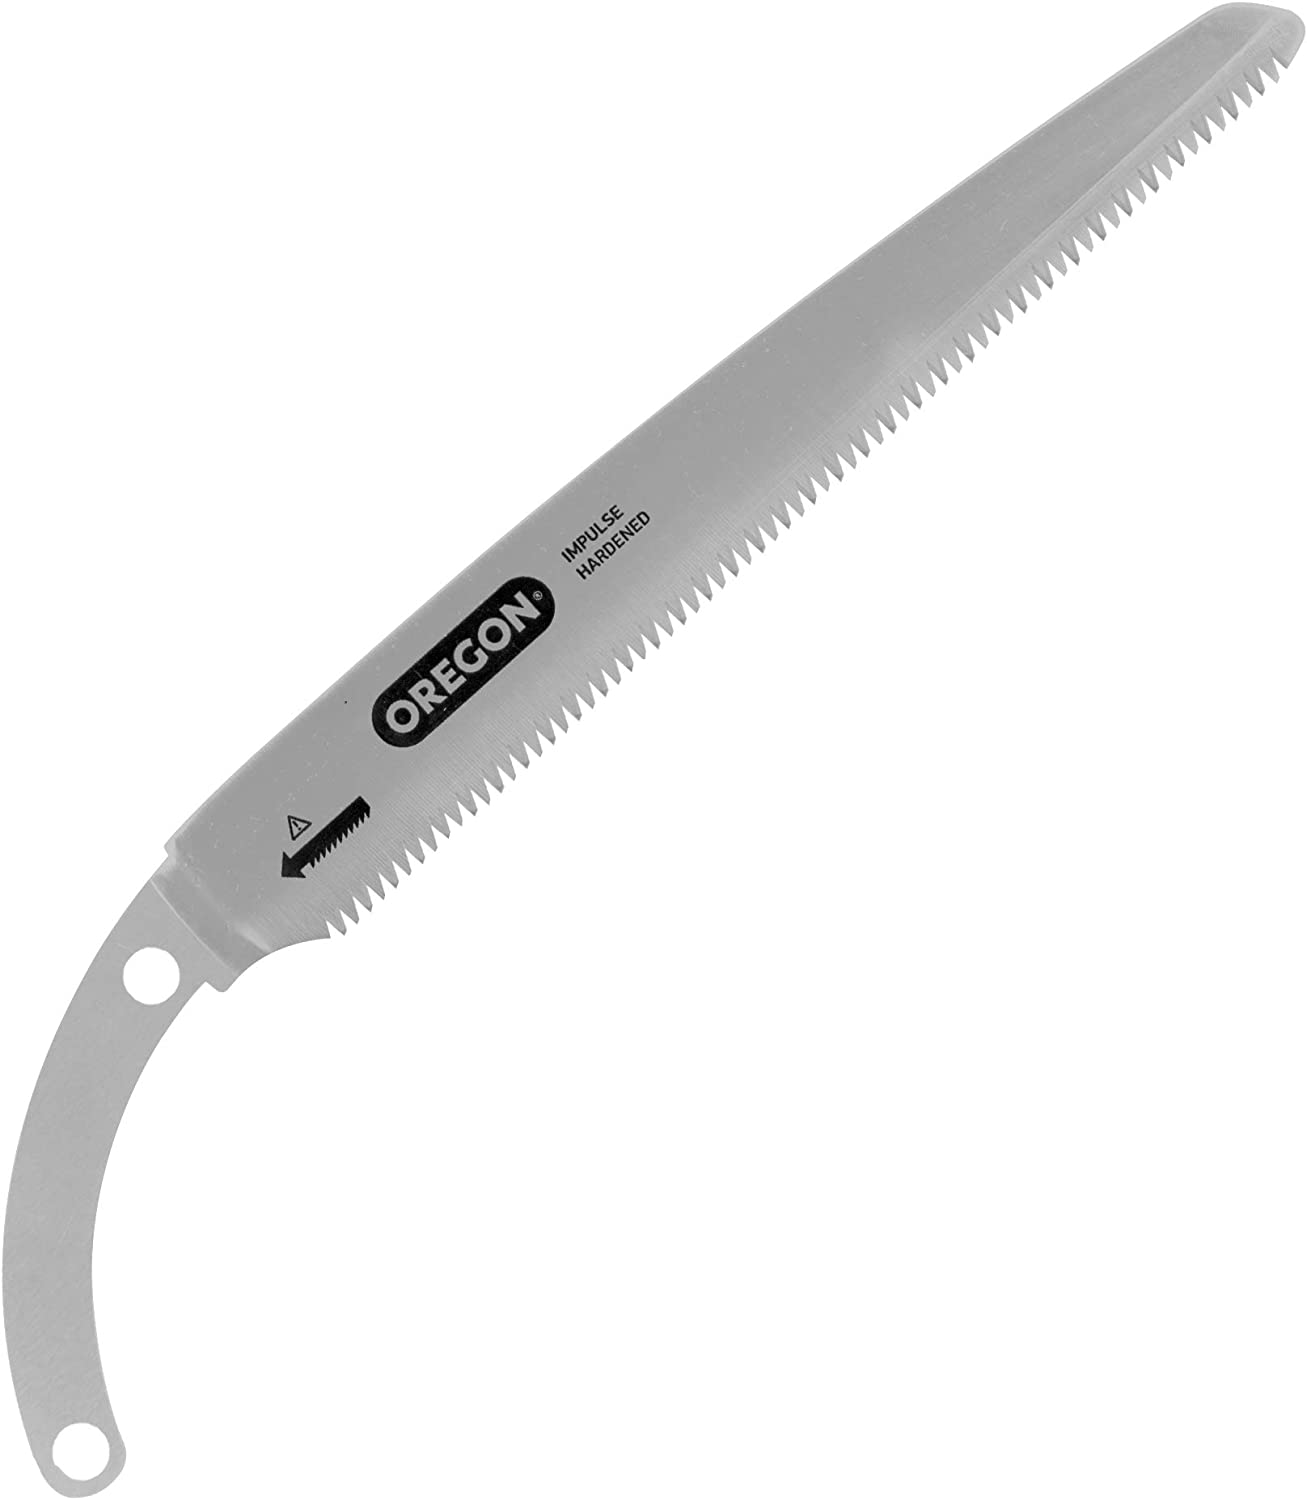 Oregon 600140 Replacement Straight Blade for Arborist Hand Saw, 12"